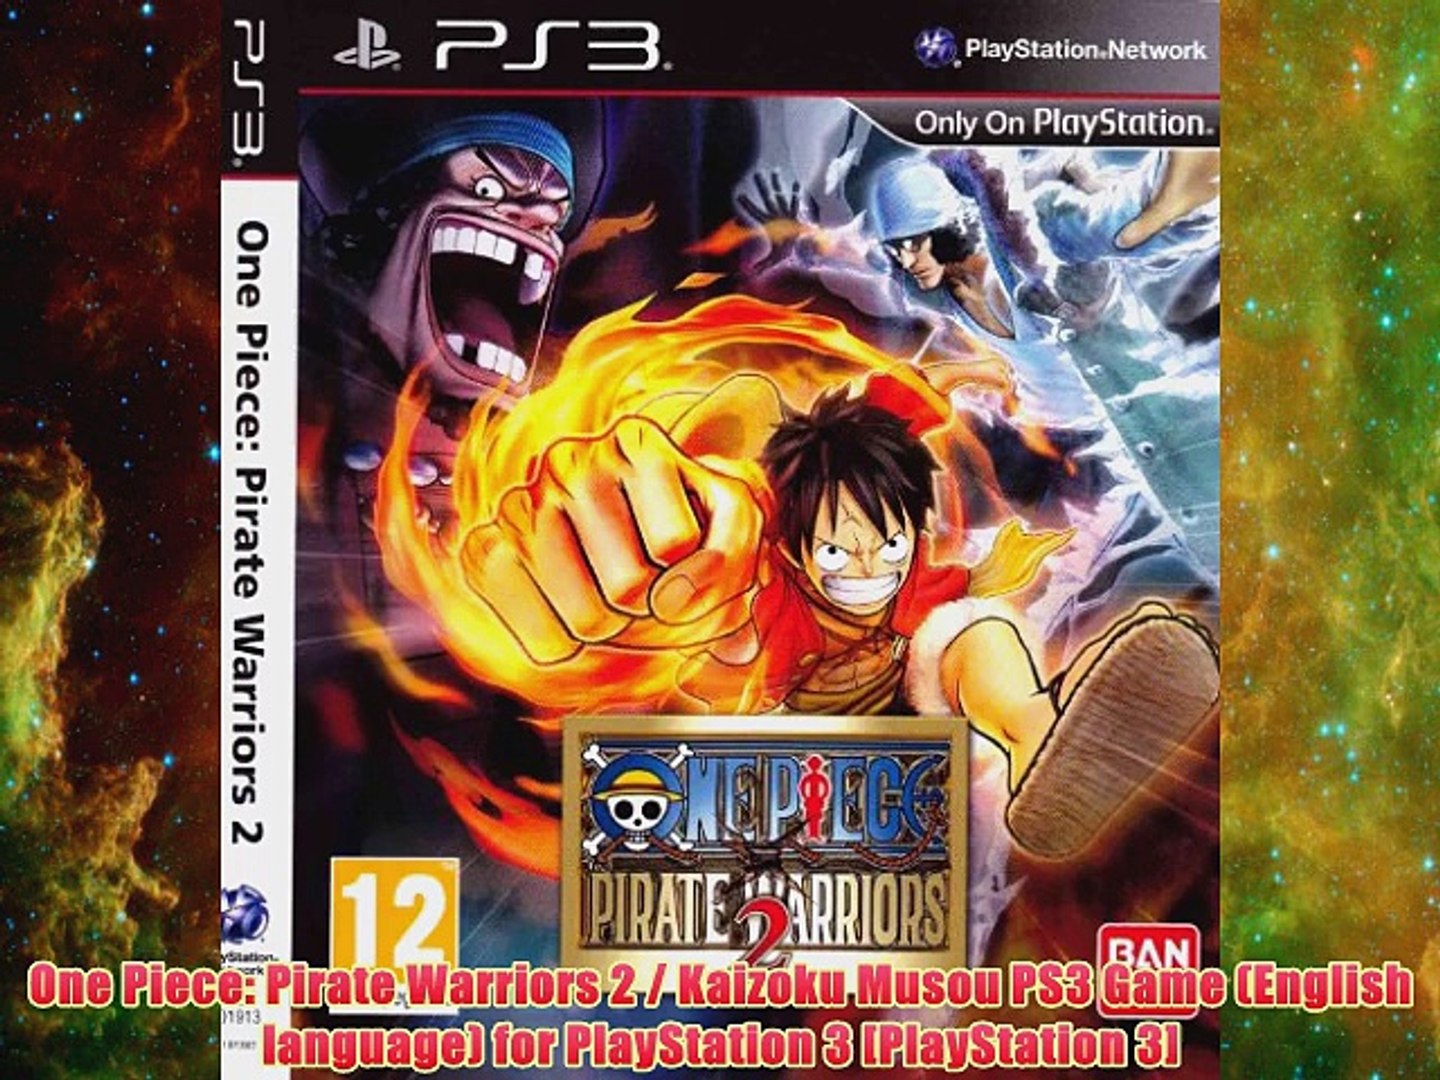 One Piece Pirate Warriors 2 Kaizoku Musou PS3 Game English language for  PlayStation 3 PlayStation 3 - Video Dailymotion